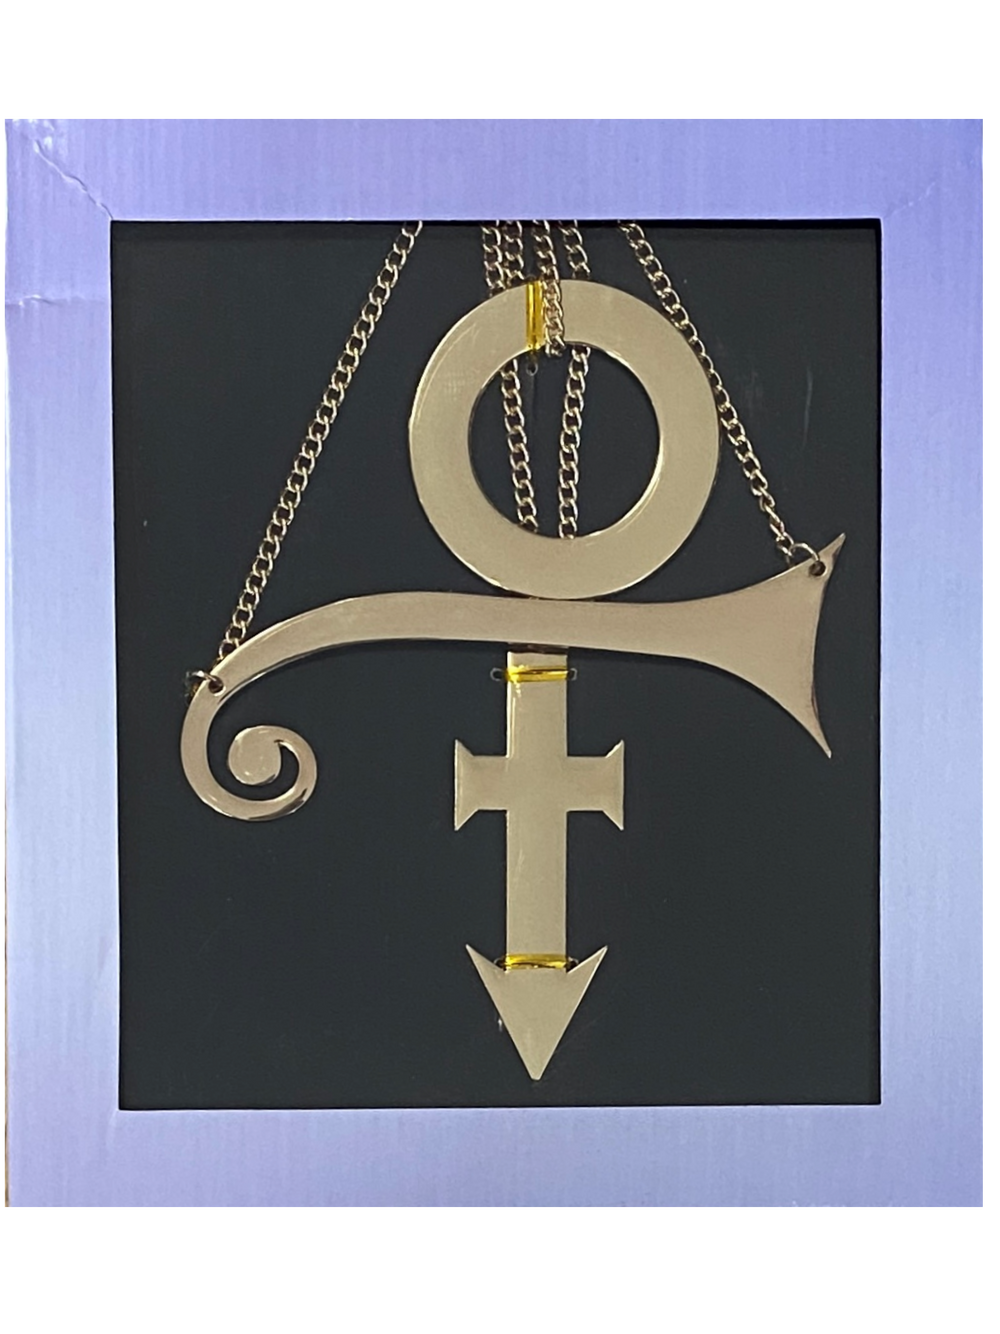 Prince Official Paisley Park Original 3 Chains O' Gold Replica Necklace Boxed